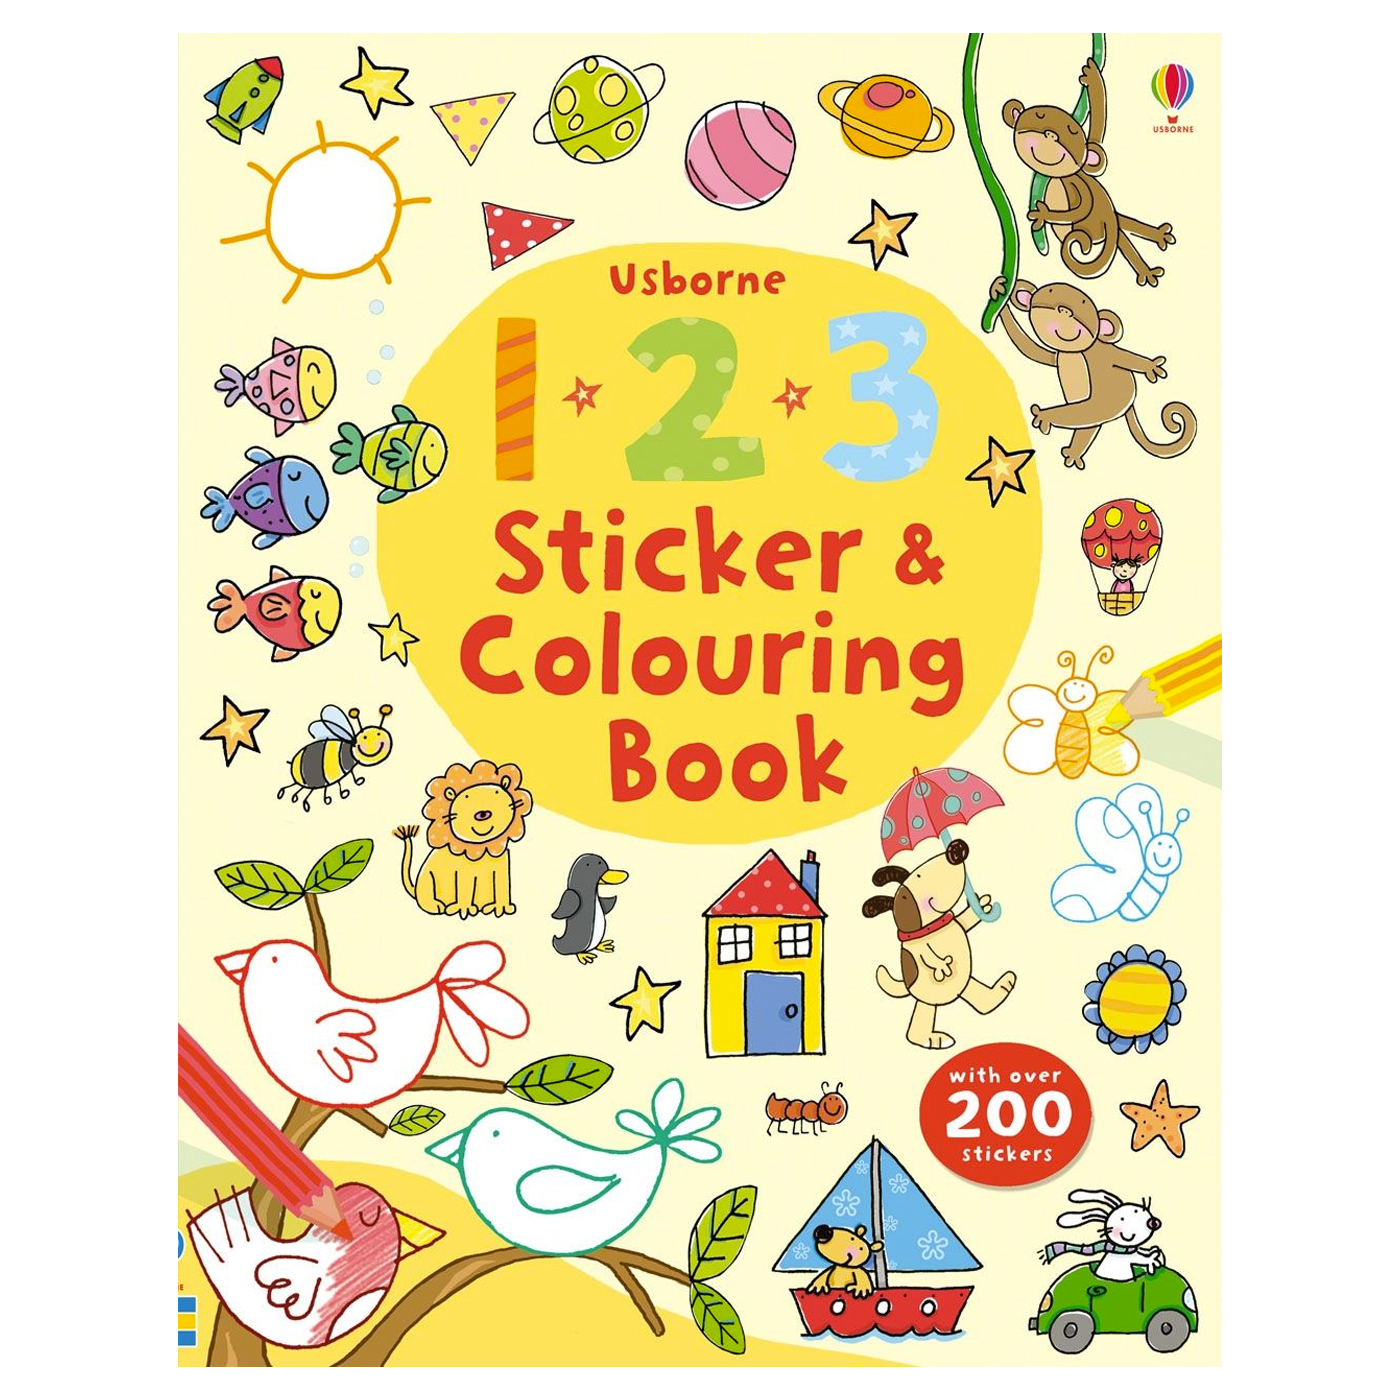  123 Sticker and Colouring Book